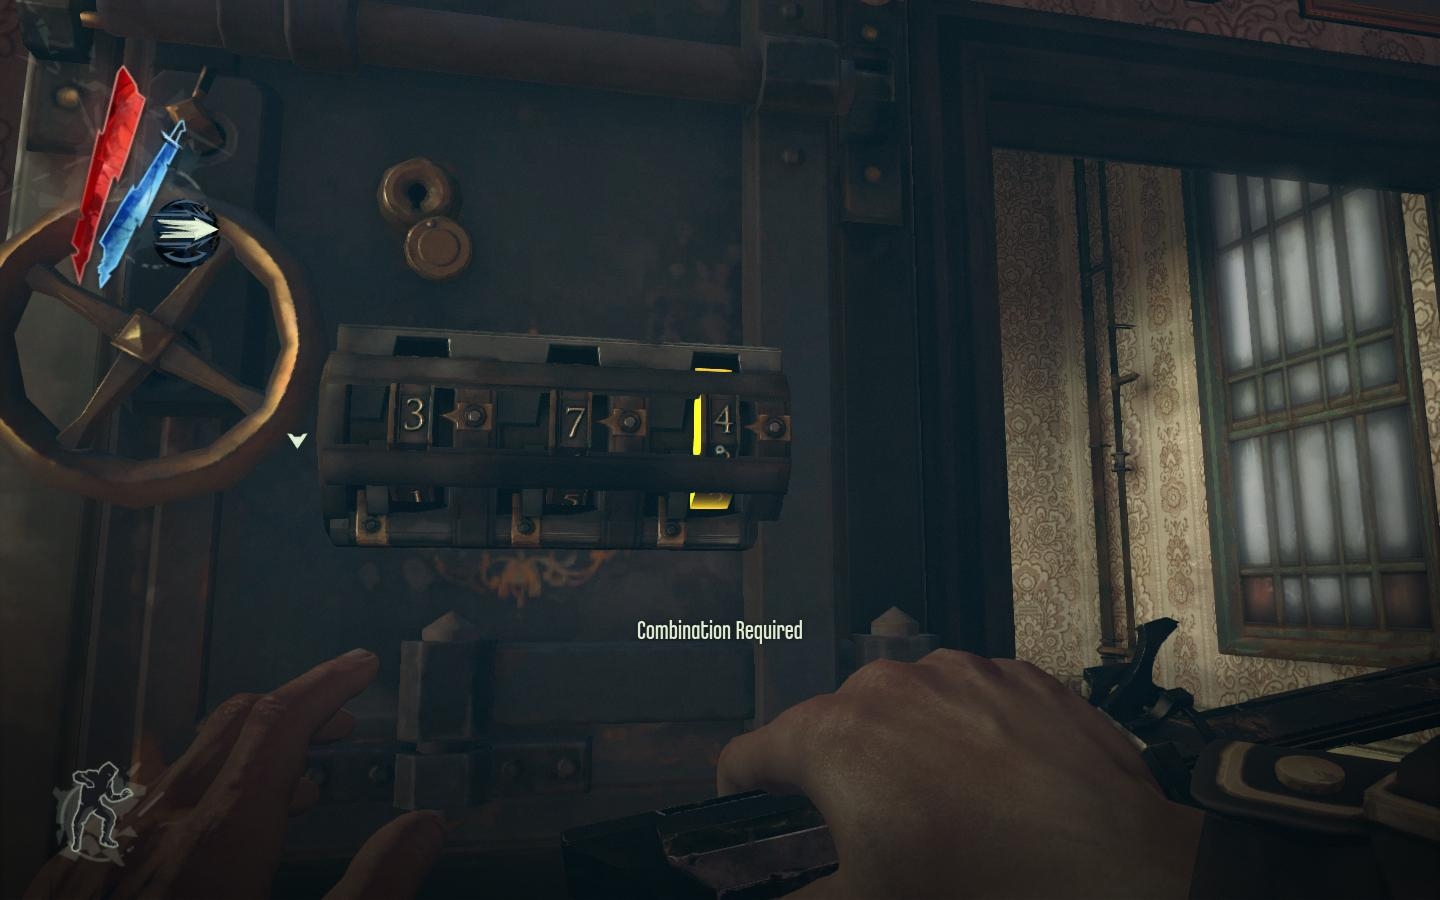  Dishonored 2 safe combinations list